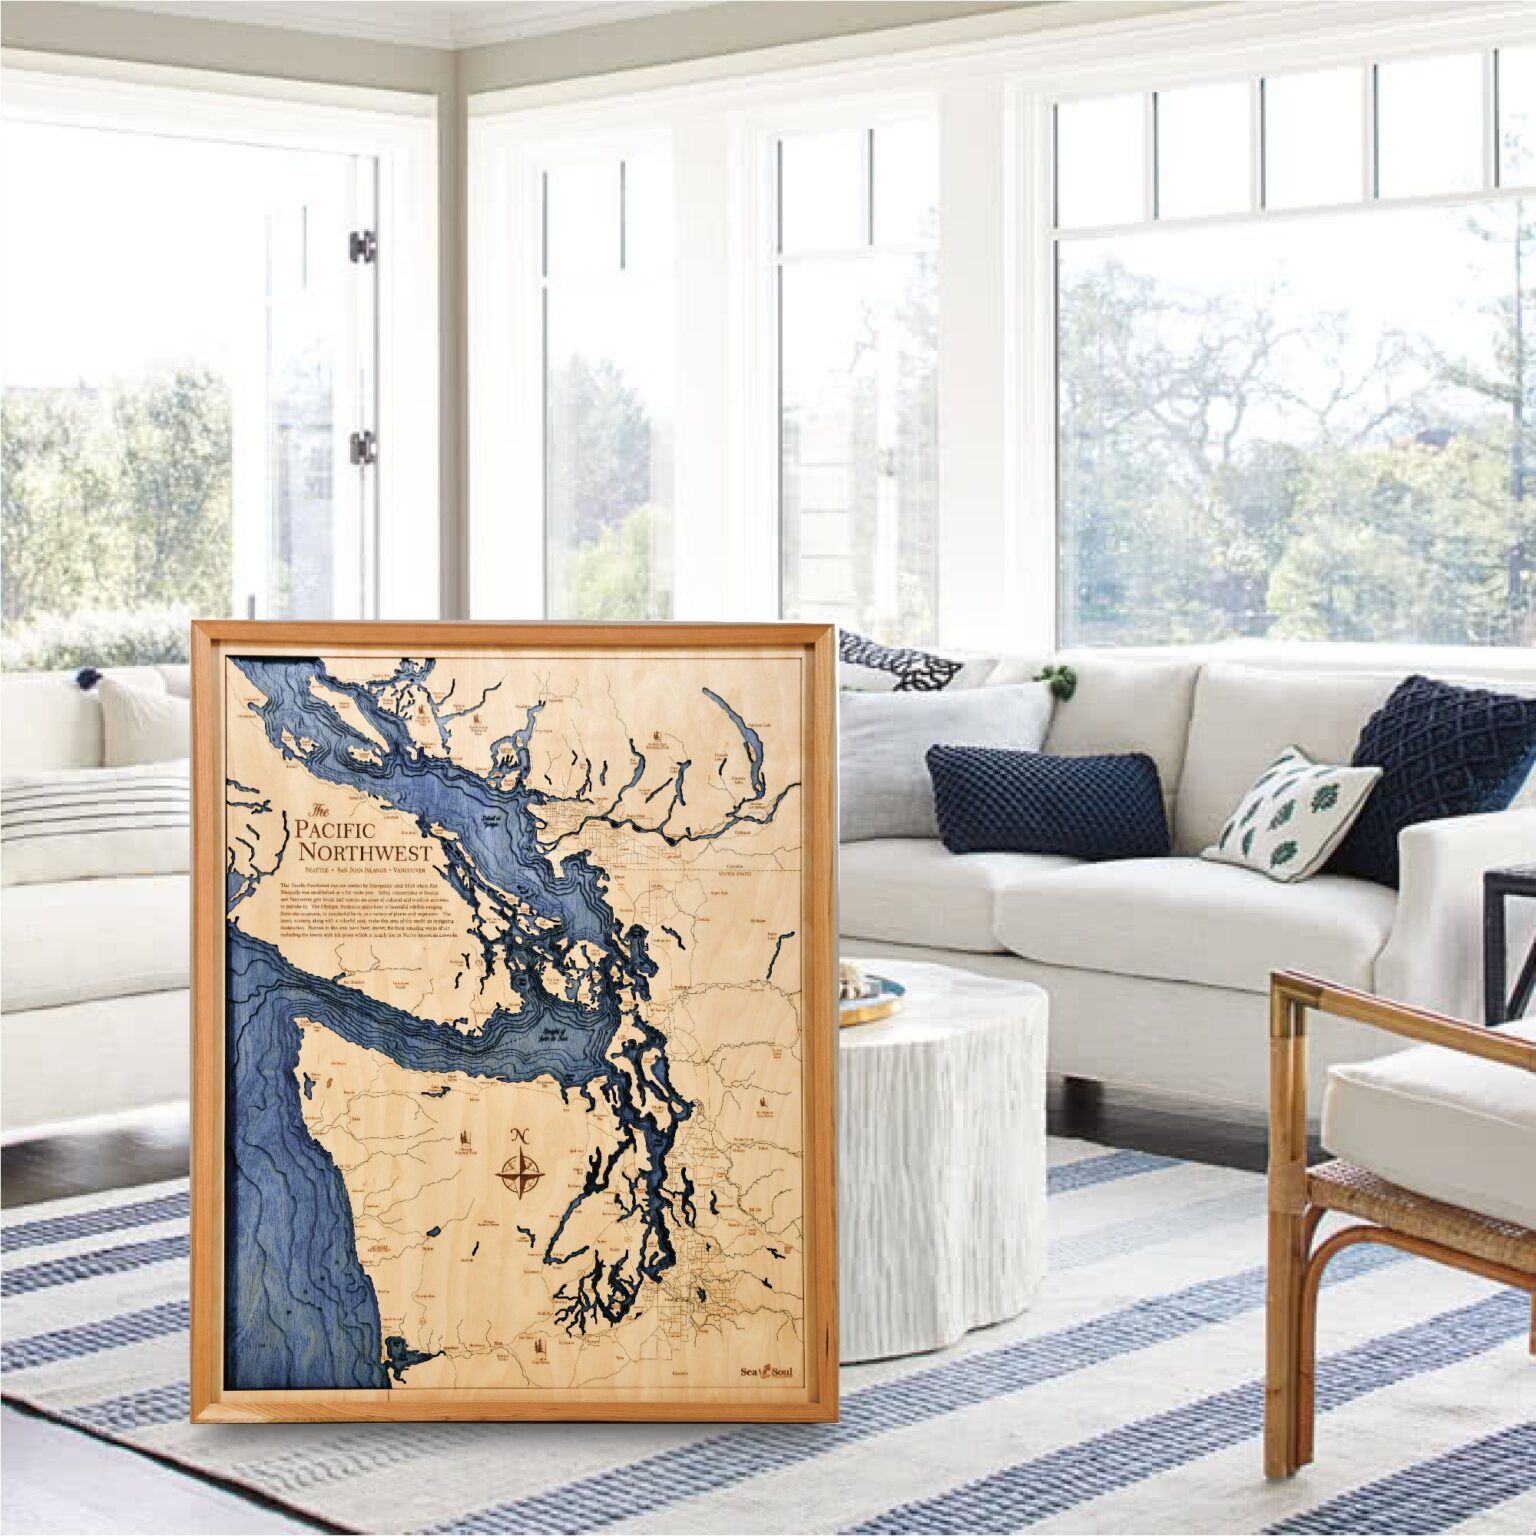 Pacific Northwest Nautical Wood Chart | 3d Wall Art 24"x30" | Sea And Pertaining To Northwest Wall Art (View 12 of 15)